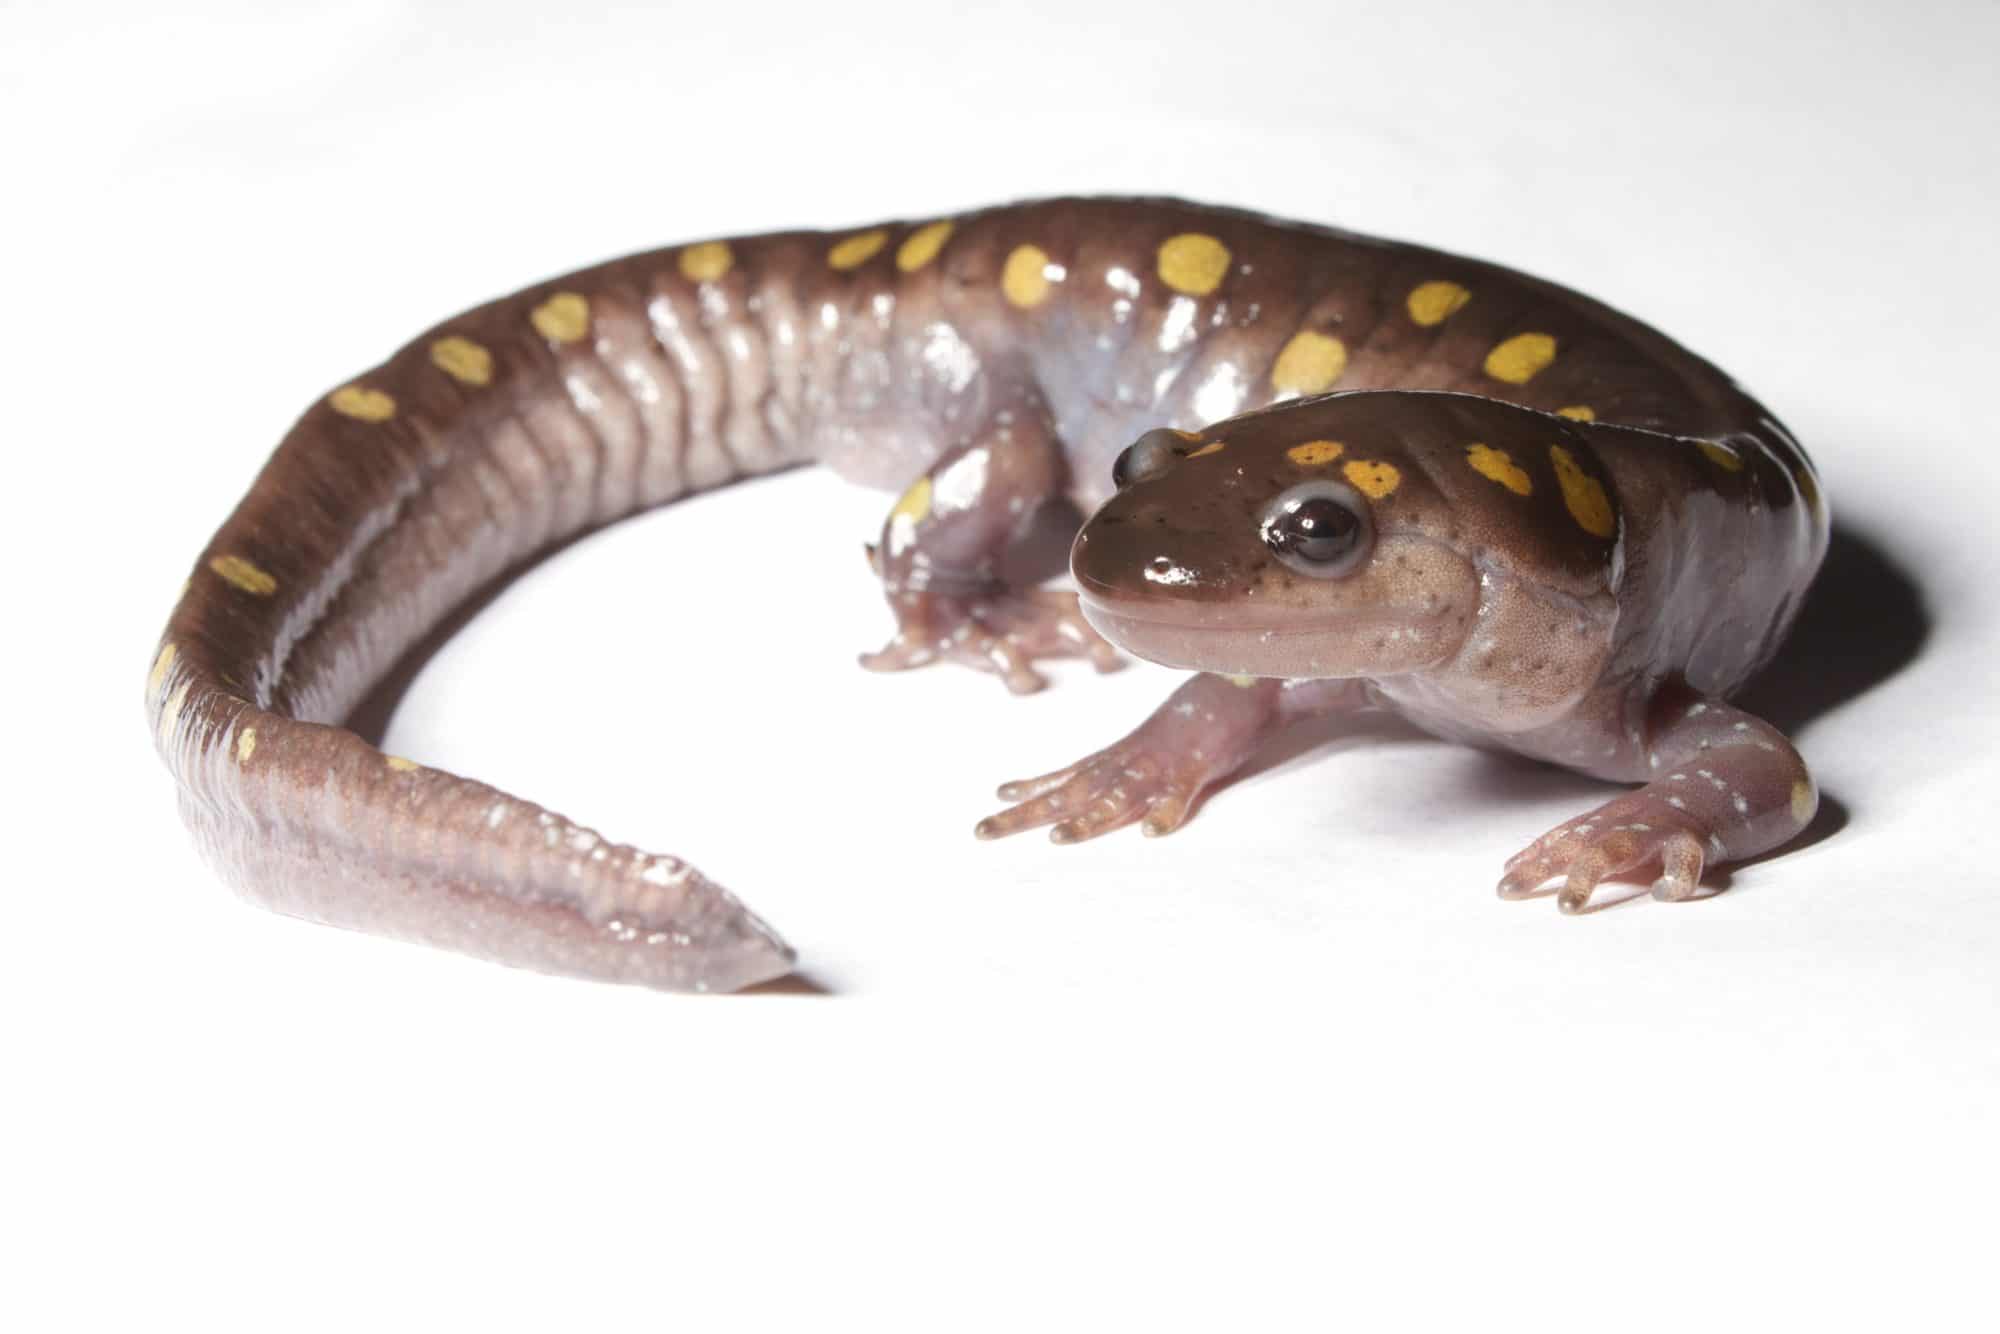 A spotted salamander on a white background. (photo © Brian Gratwicke)